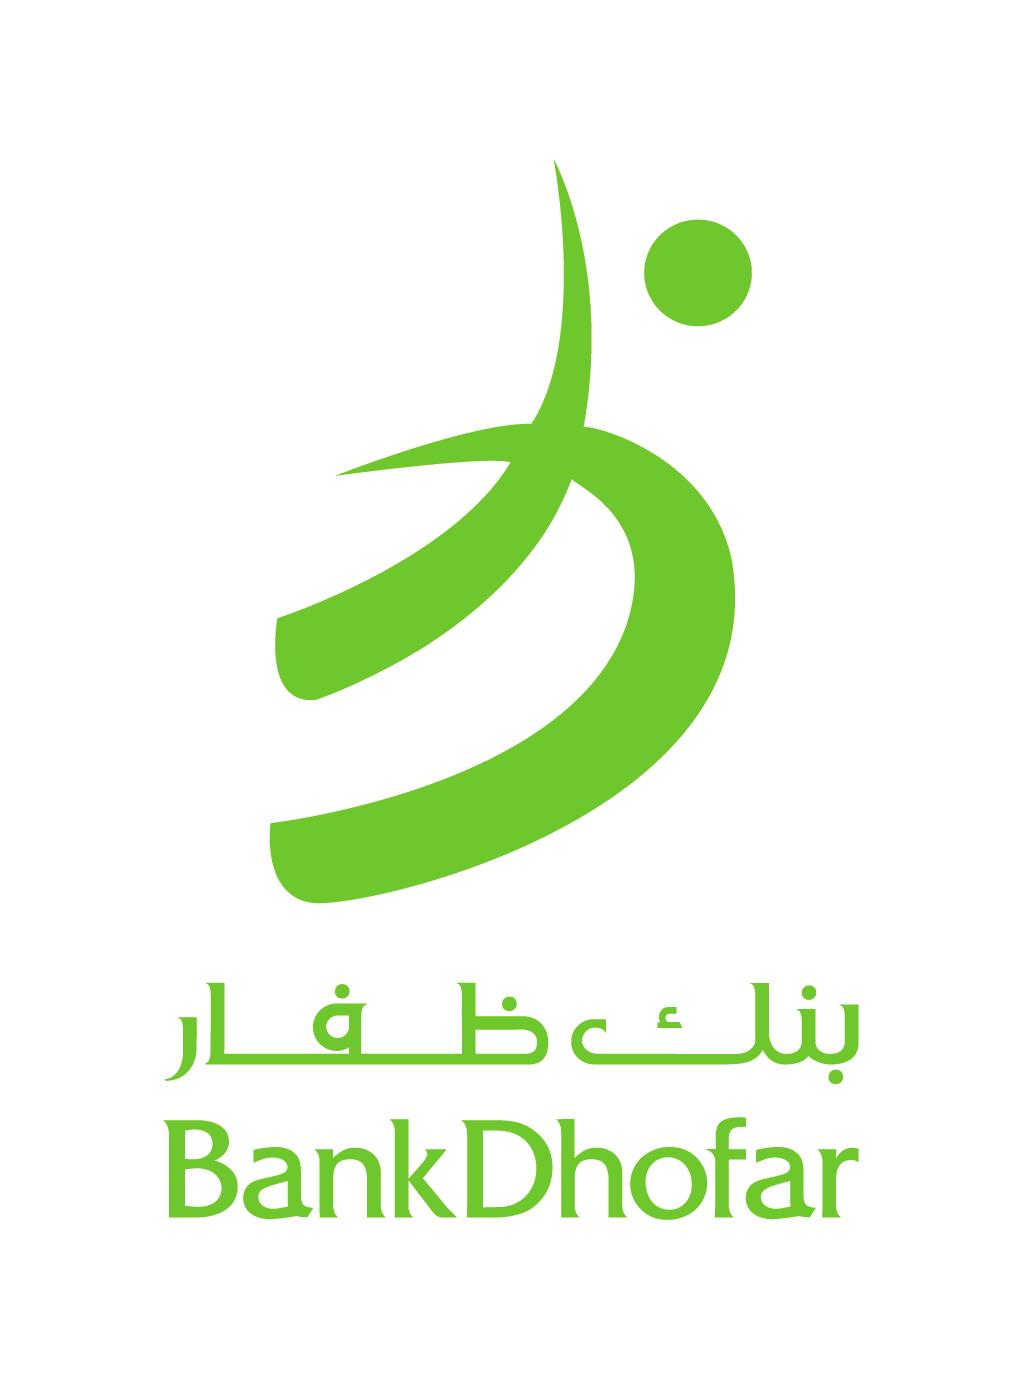 BANK DHOFAR SAOG FINANCIAL STATEMENTS 31 DECEMBER 2015 Registered and principal place of